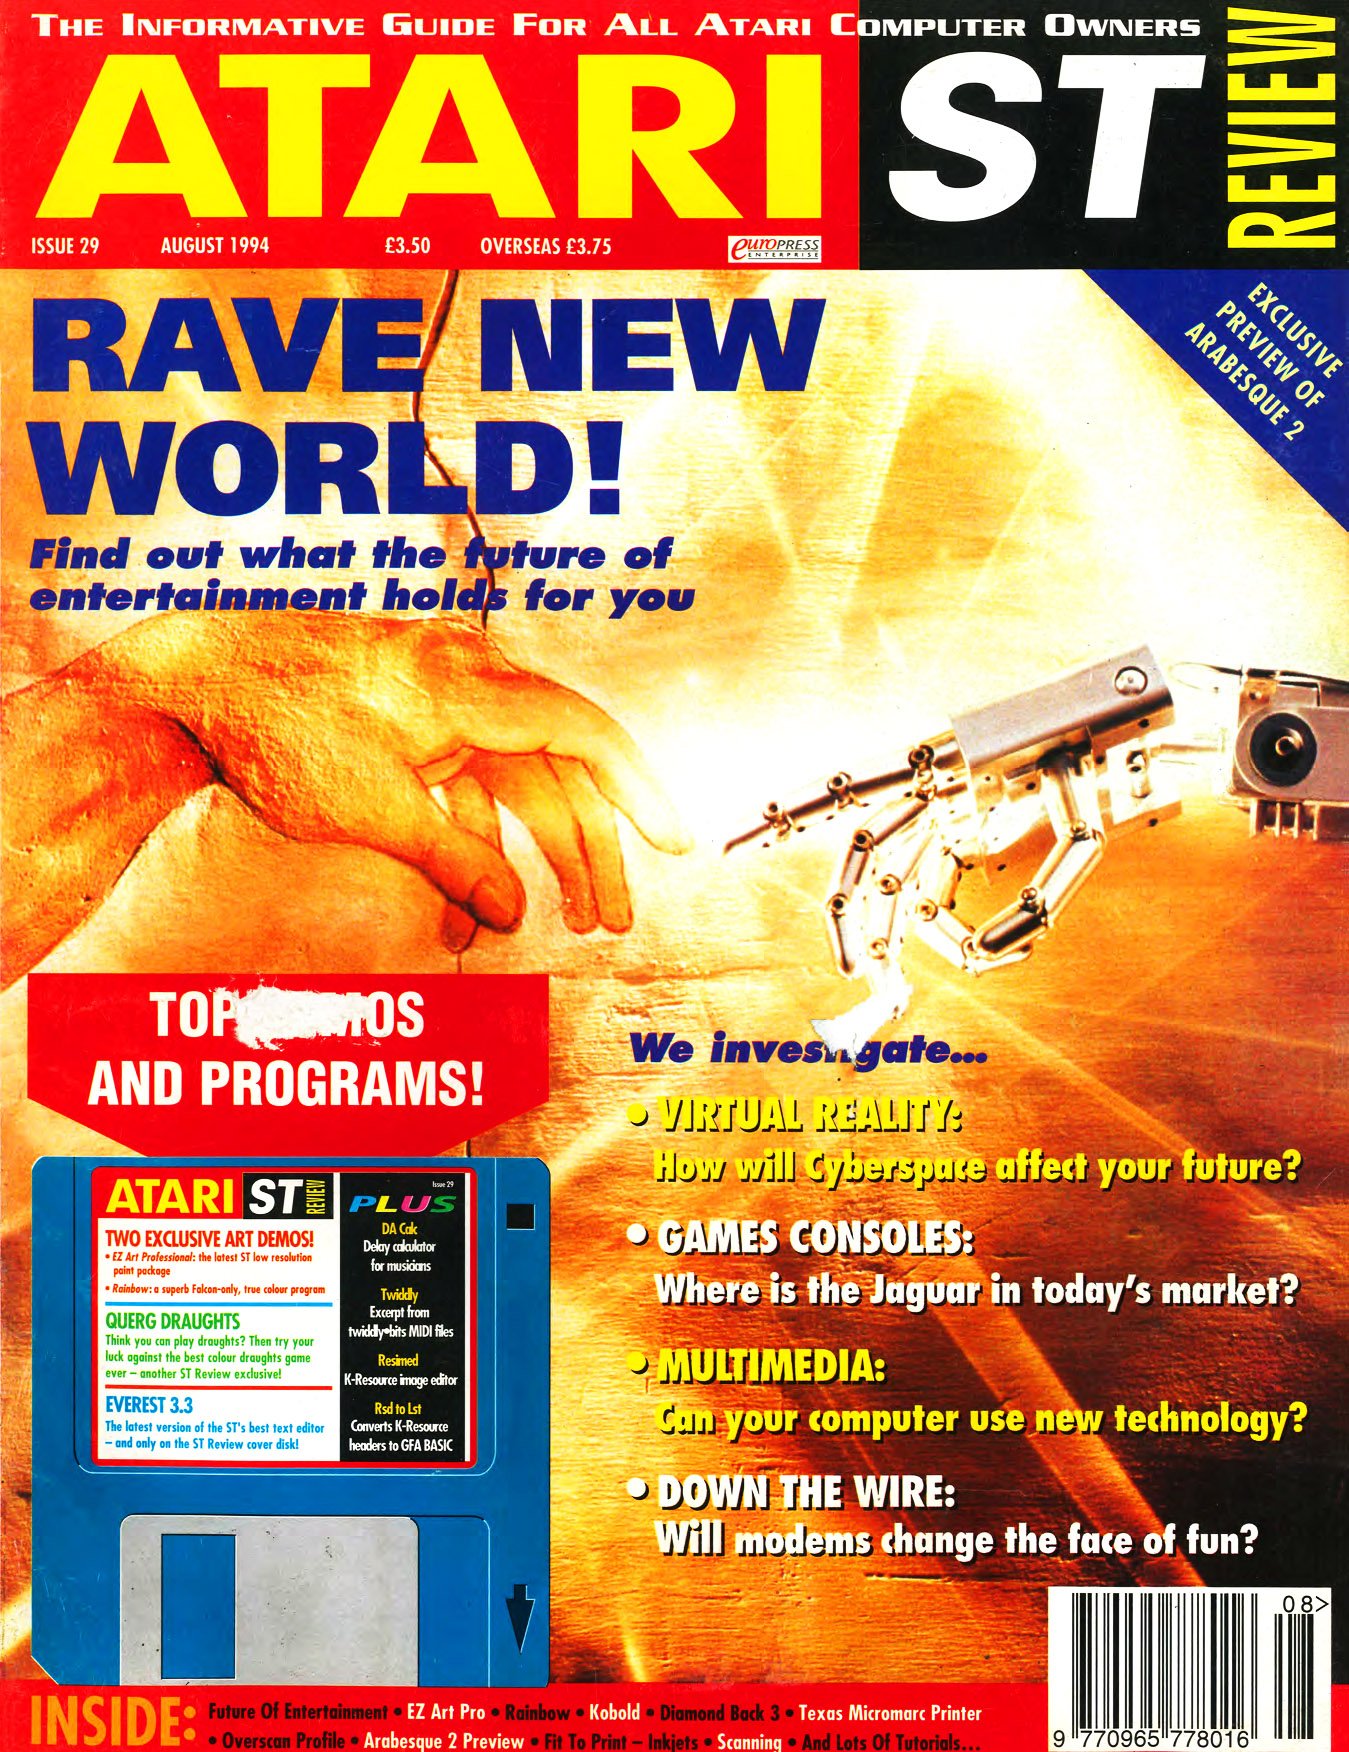 Atari ST Review Issue 29 (August 1994)